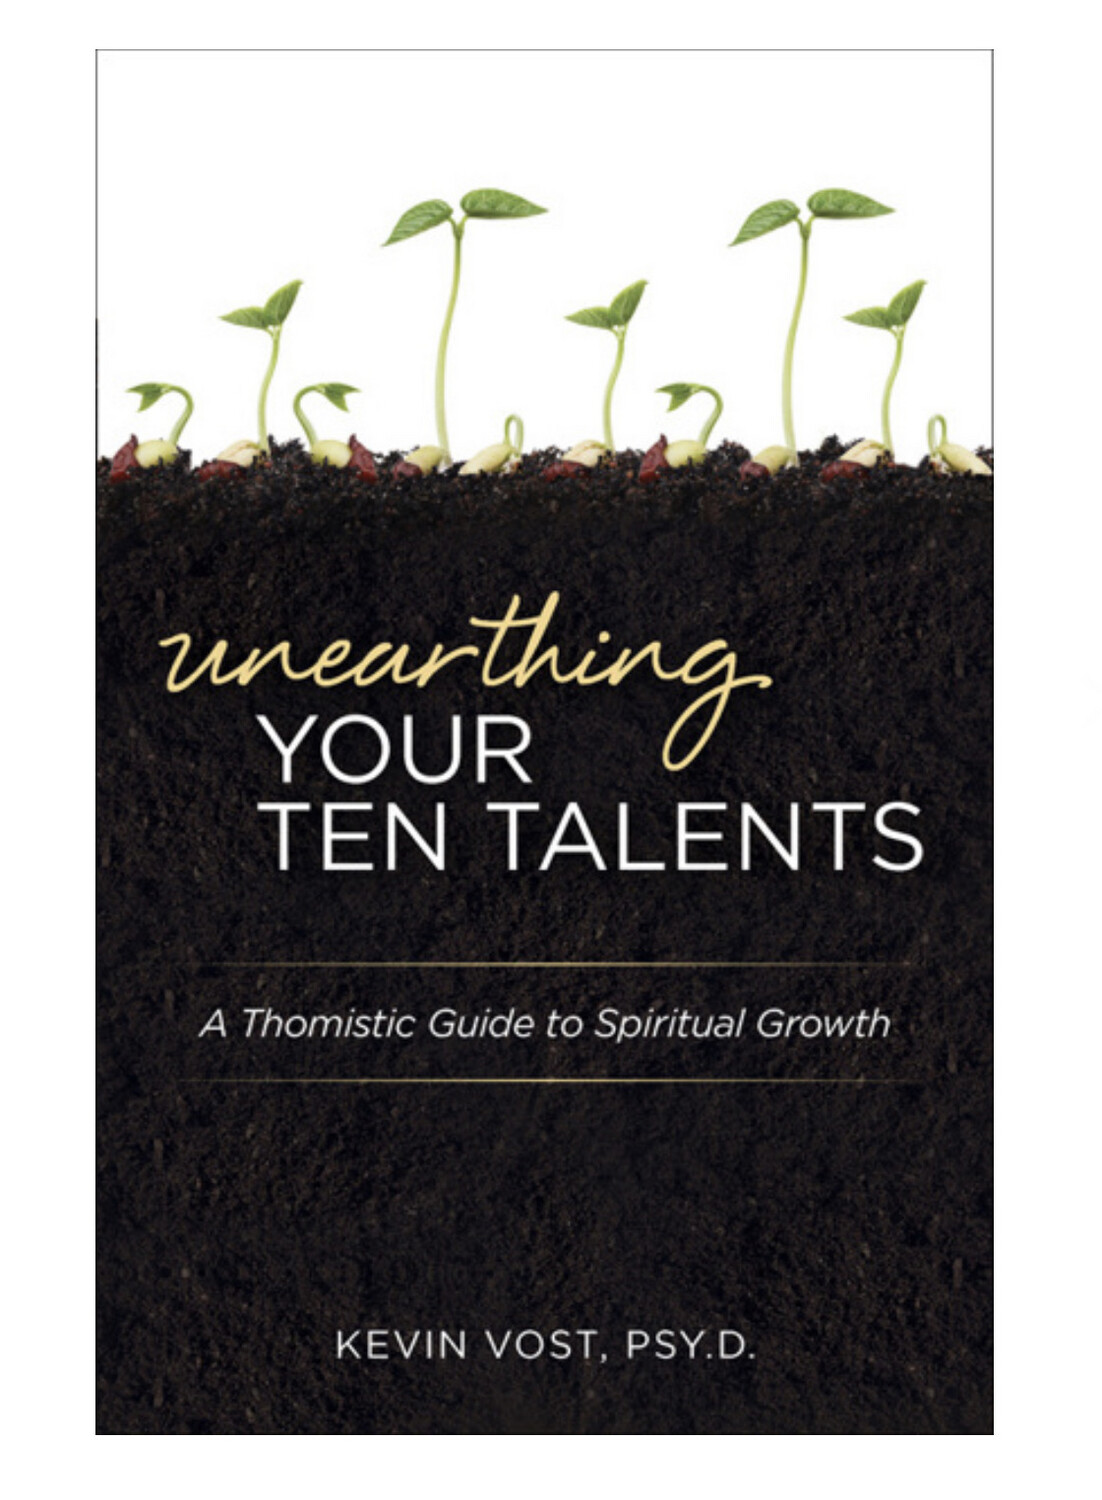 Unearthing Your 10 Talents: A Thomistic Guide to Spiritual Growth through the Virtues and the Gifts